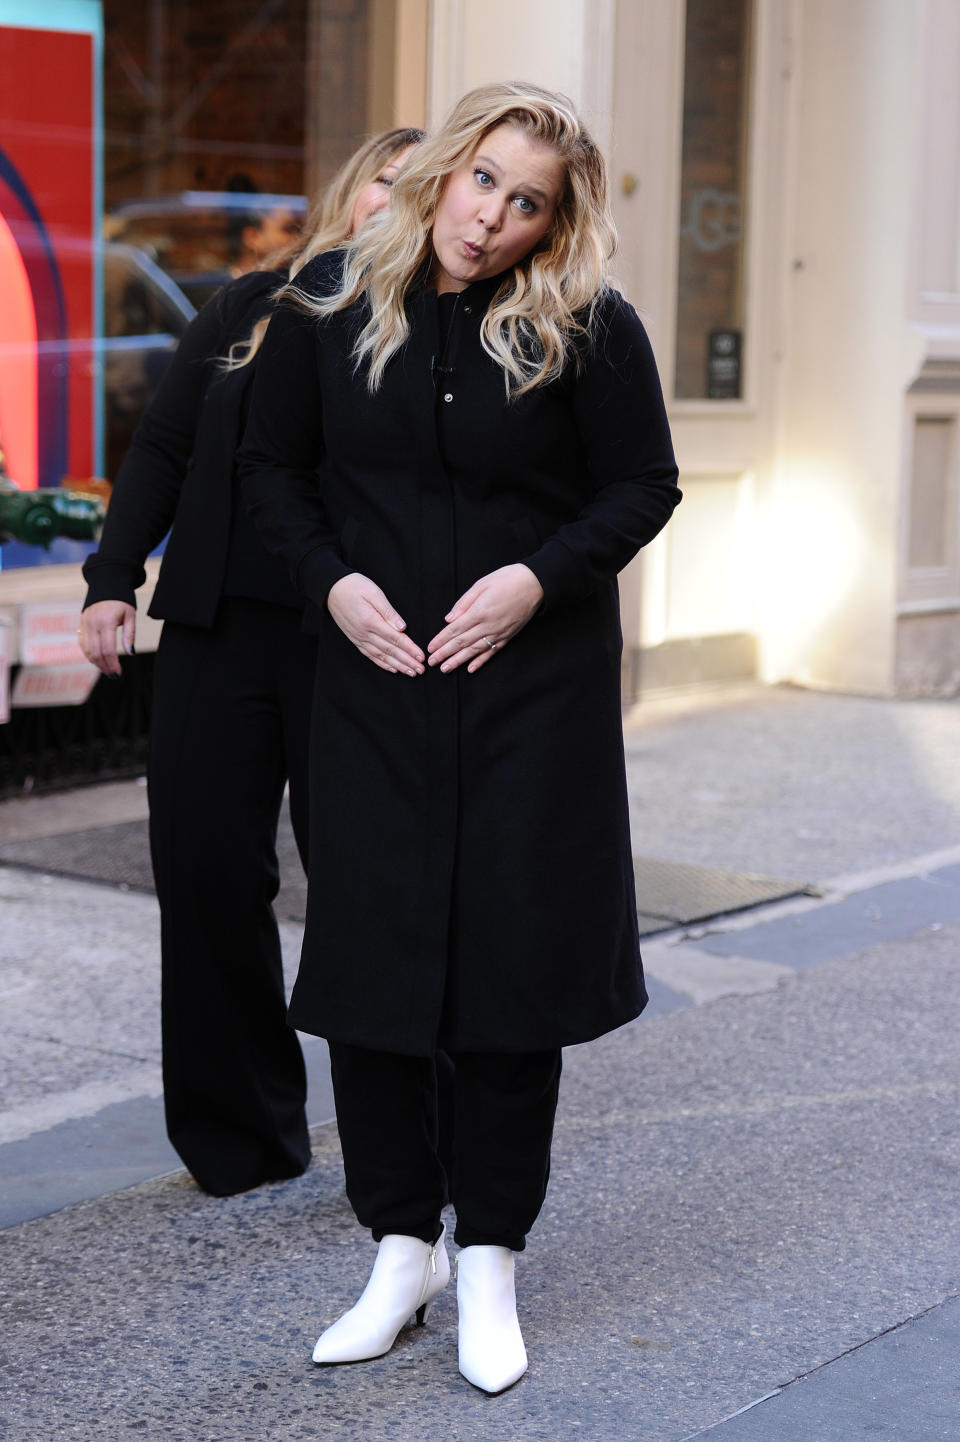 Amy Schumer announced she was expecting her first child last month. Source: Getty